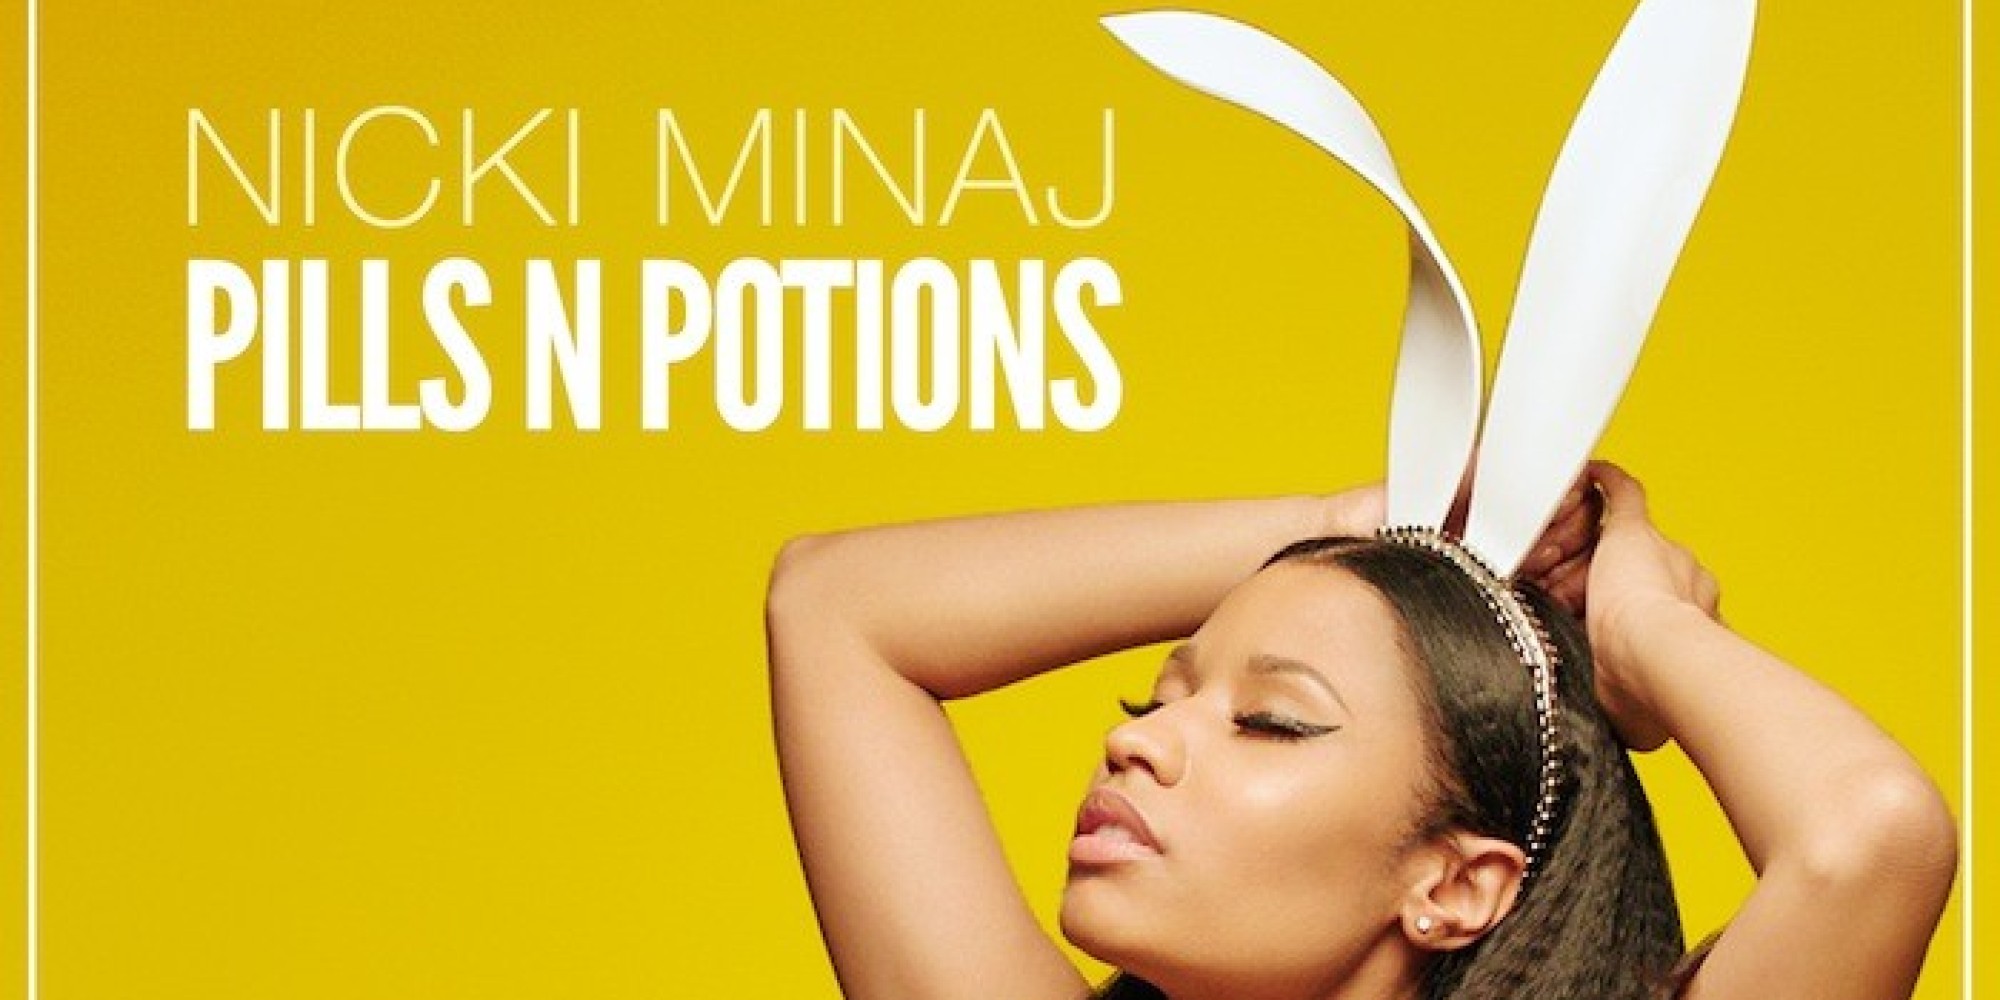 pills and potions song download